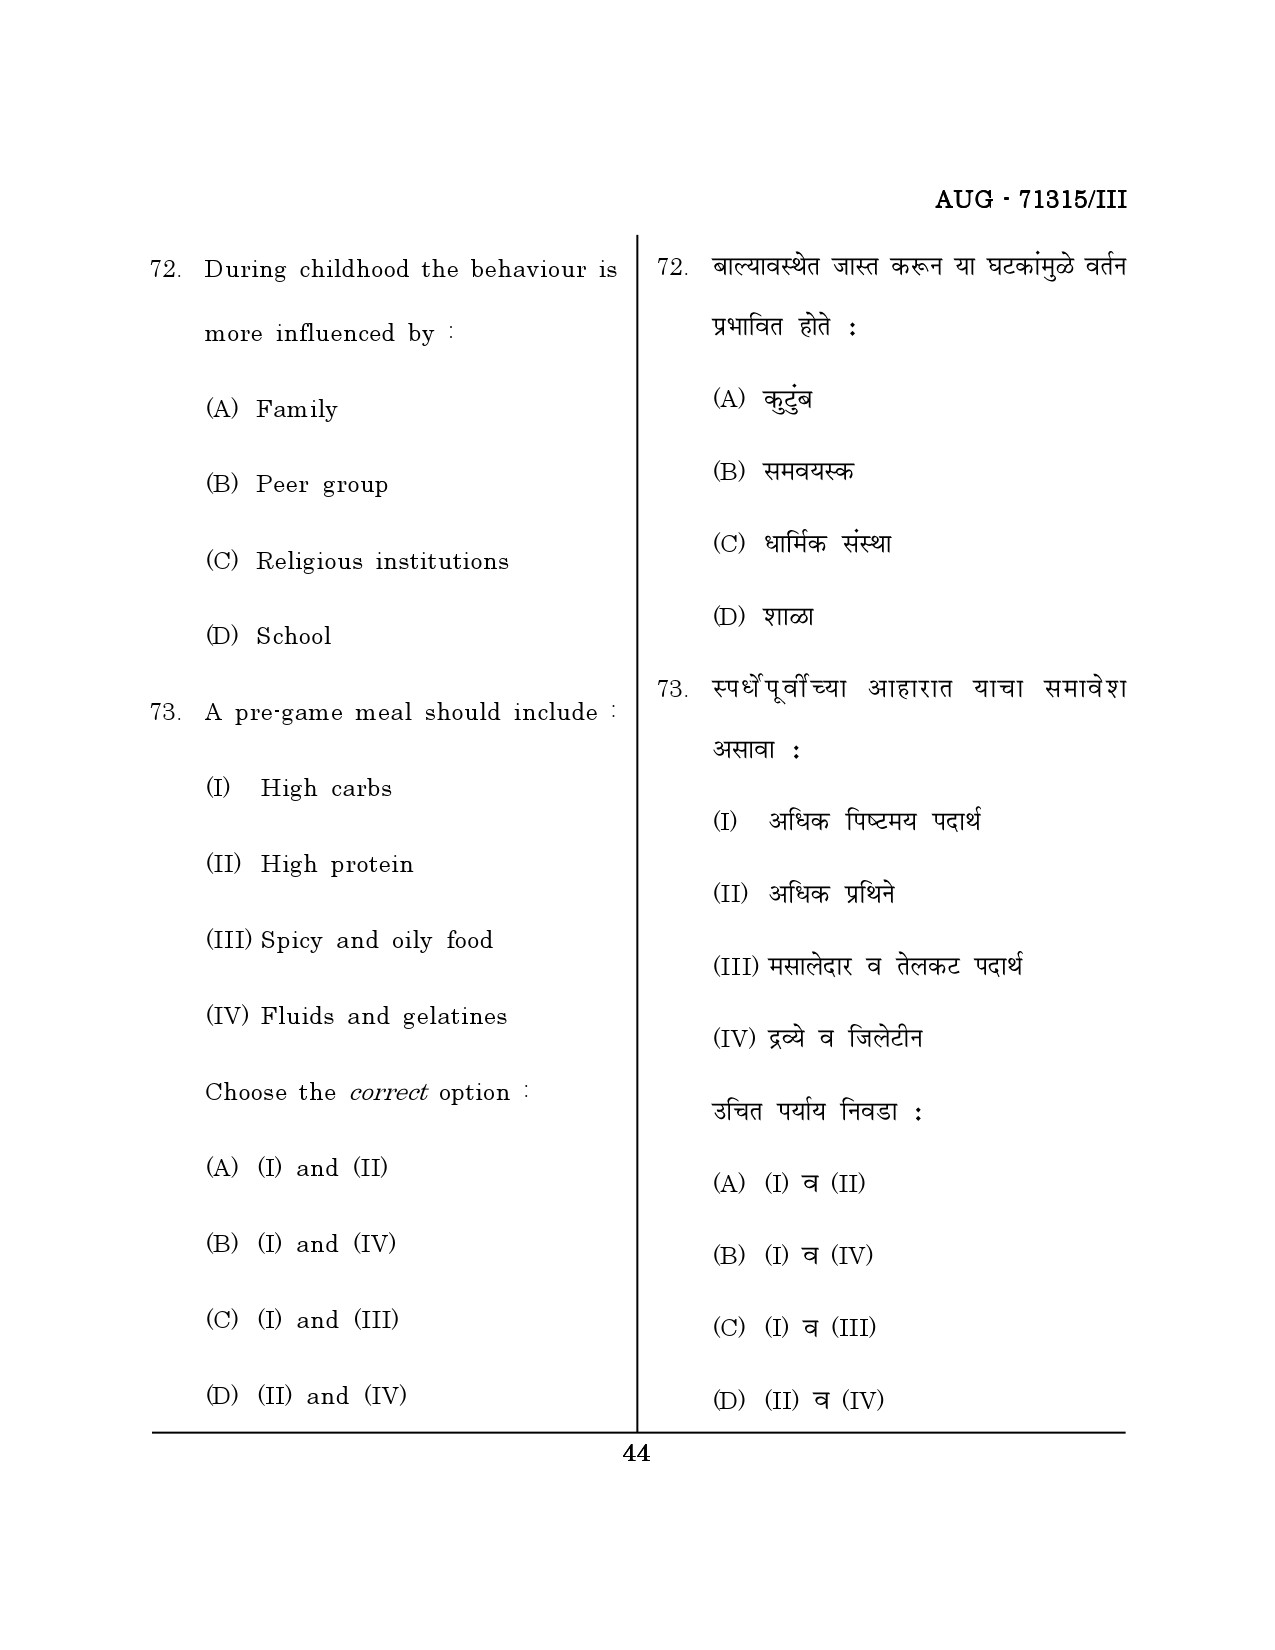 Maharashtra SET Physical Education Question Paper III August 2015 43